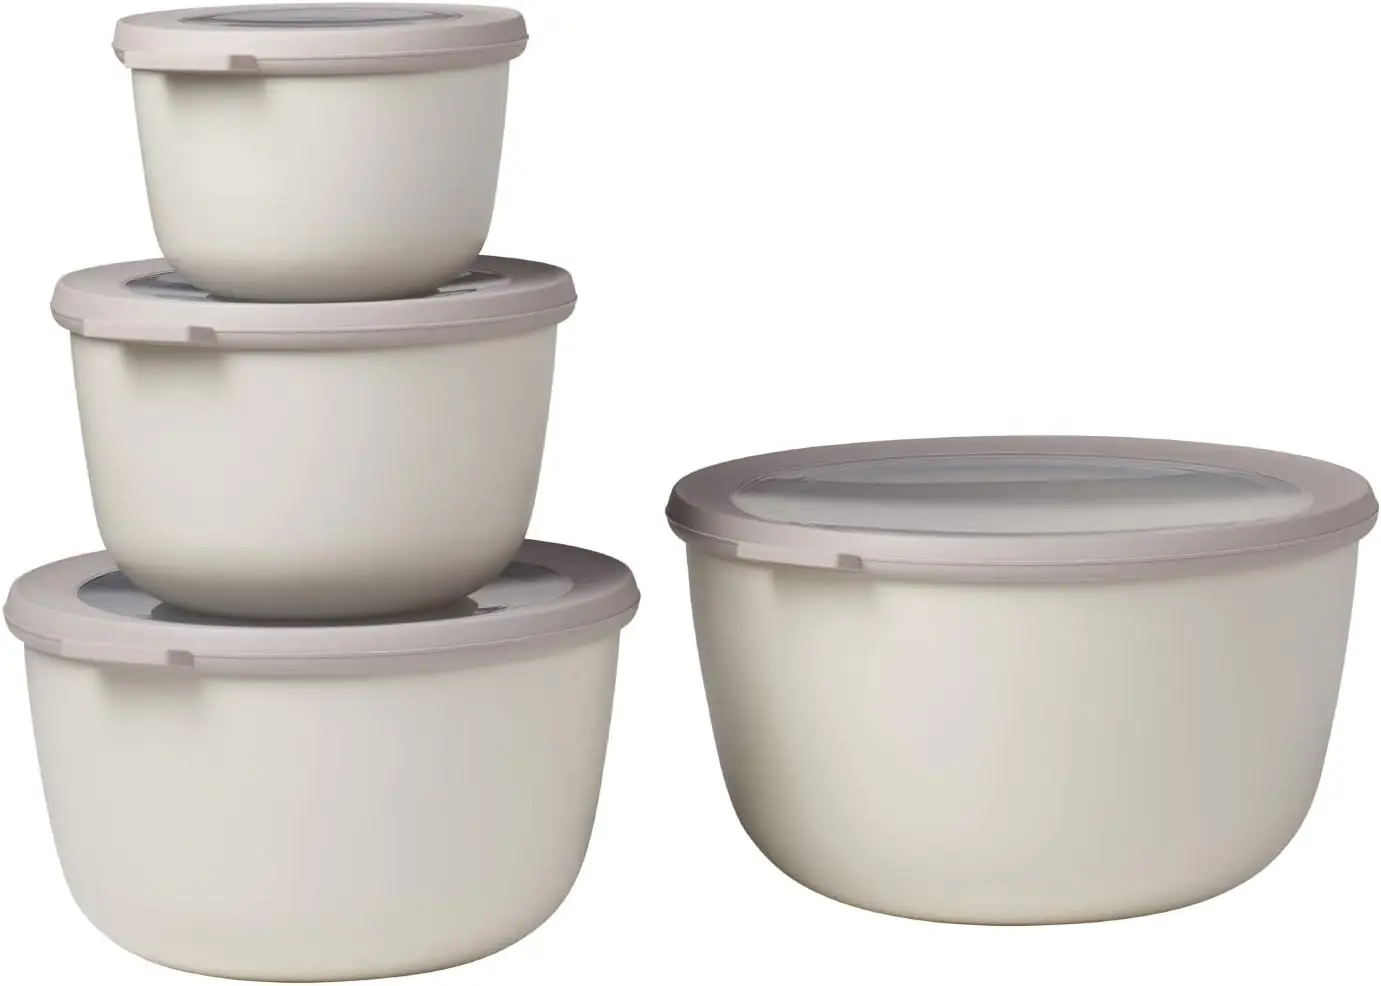 

Cirqula Set of 4 Multi Food Storage and Serving Bowls with Lids, Food Prep Containers, Deep, Nordic White,1 each (17oz, 34oz, 6